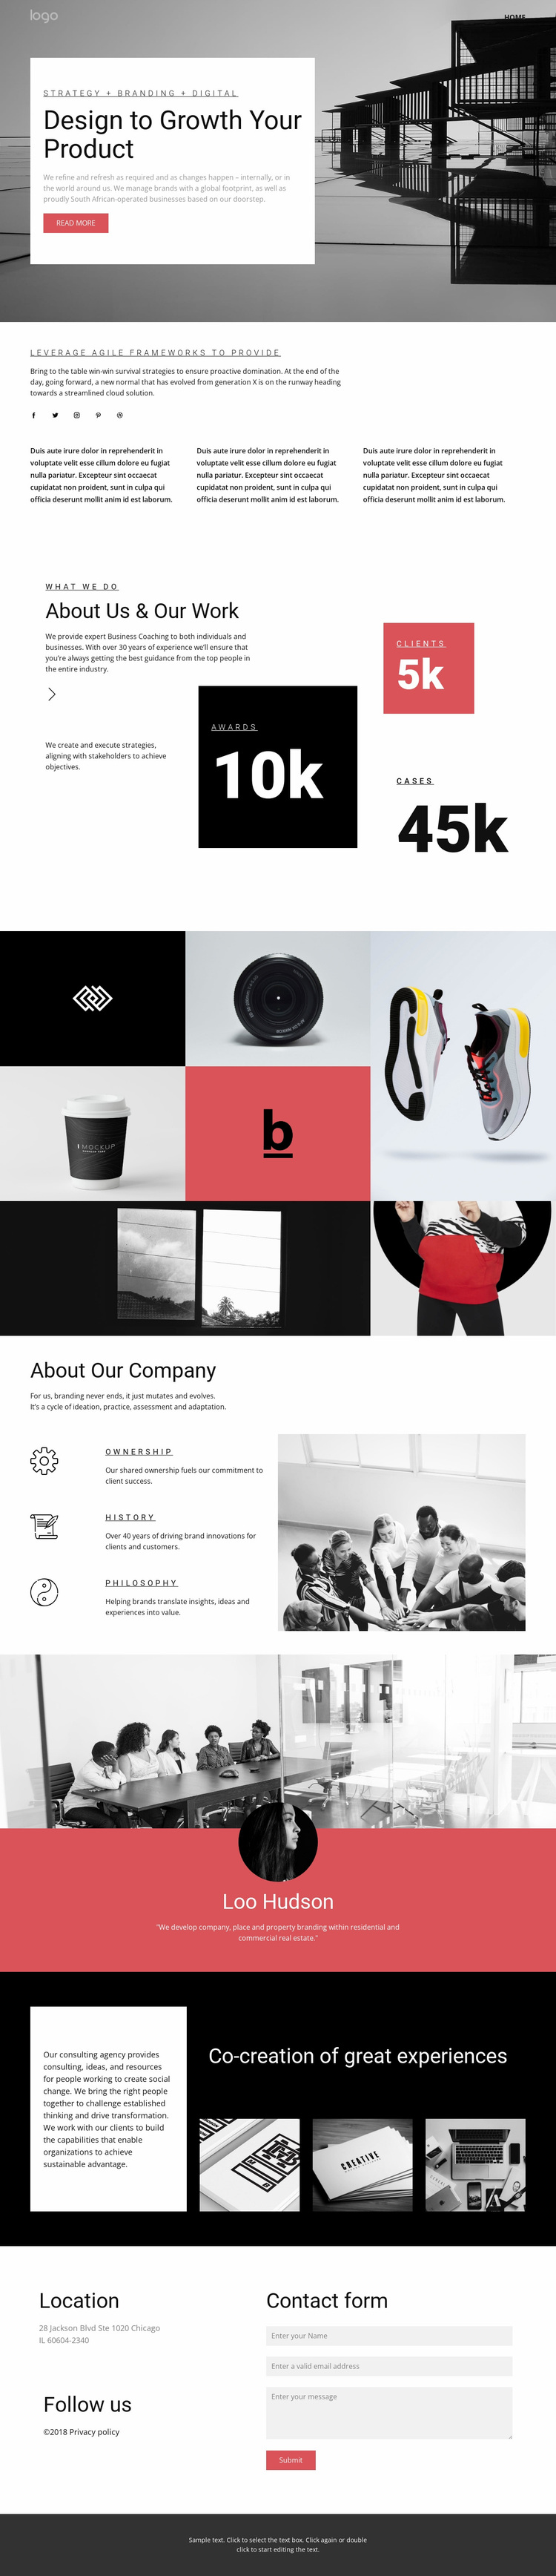 Business growth agency Website Design